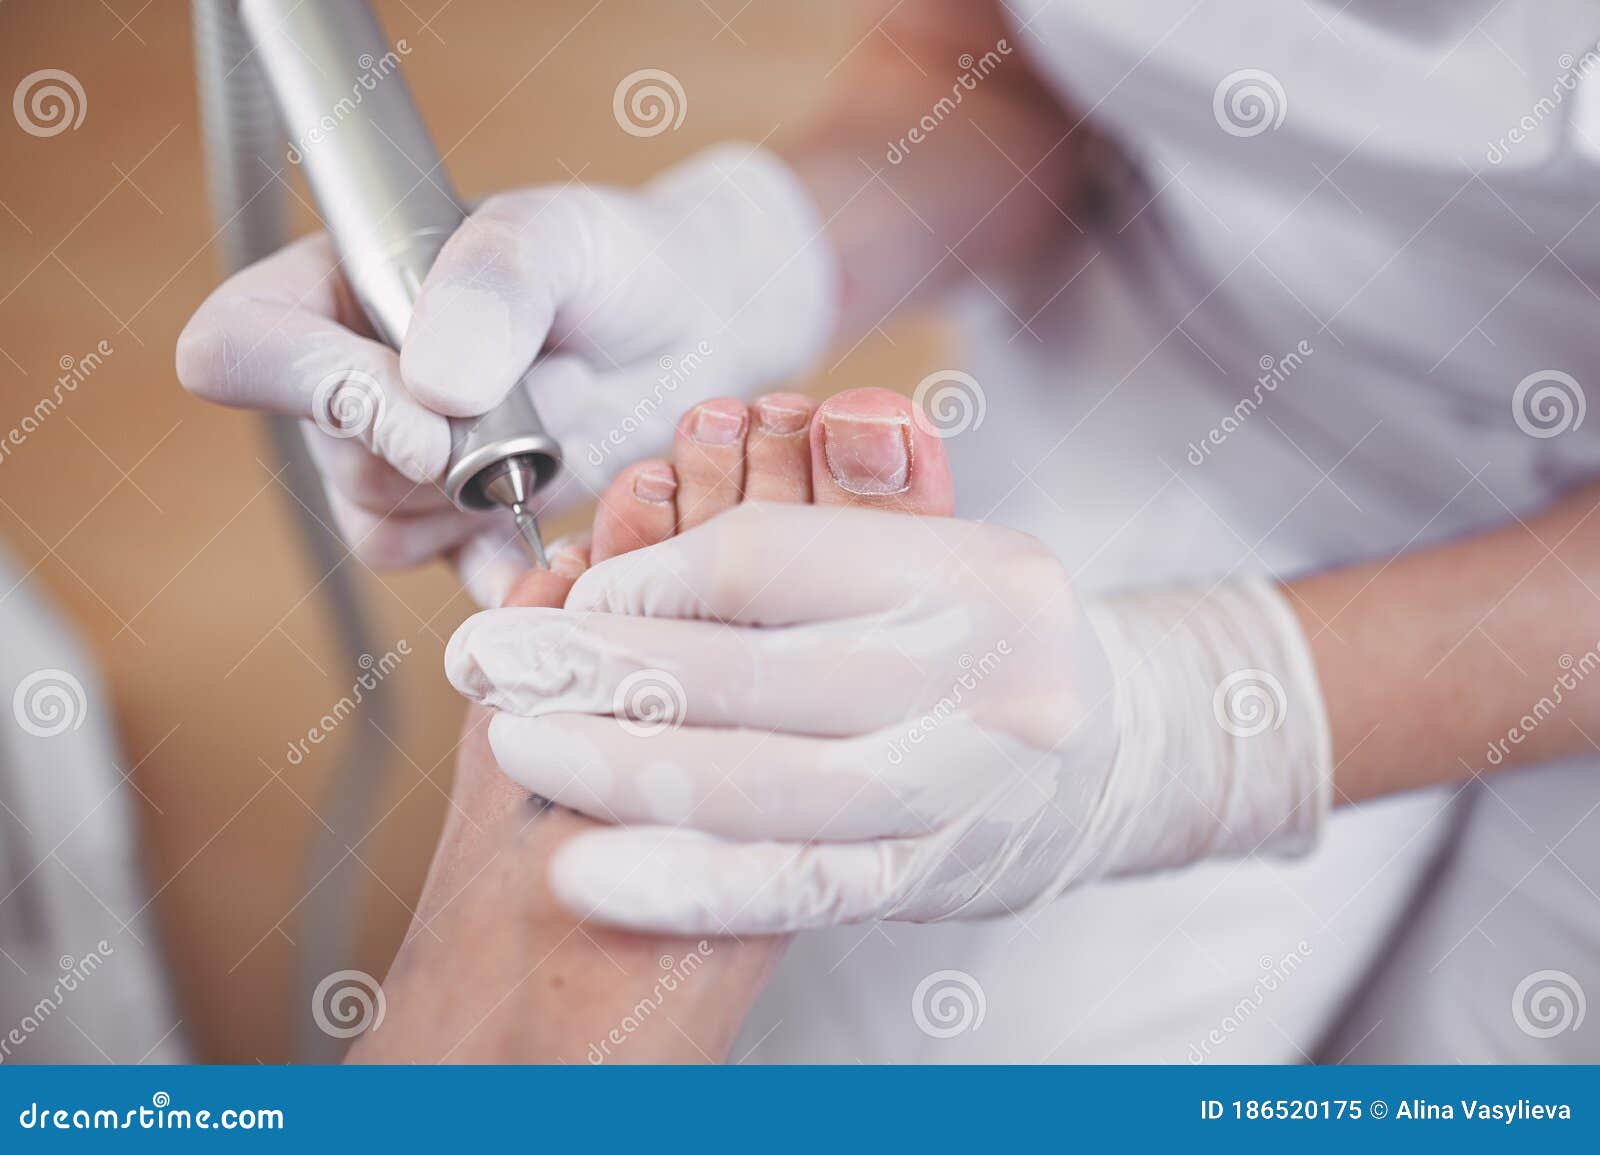 hardware medical pedicure with nail file drill apparatus. patient on pedicure treatment with pediatrician chiropodist. foot